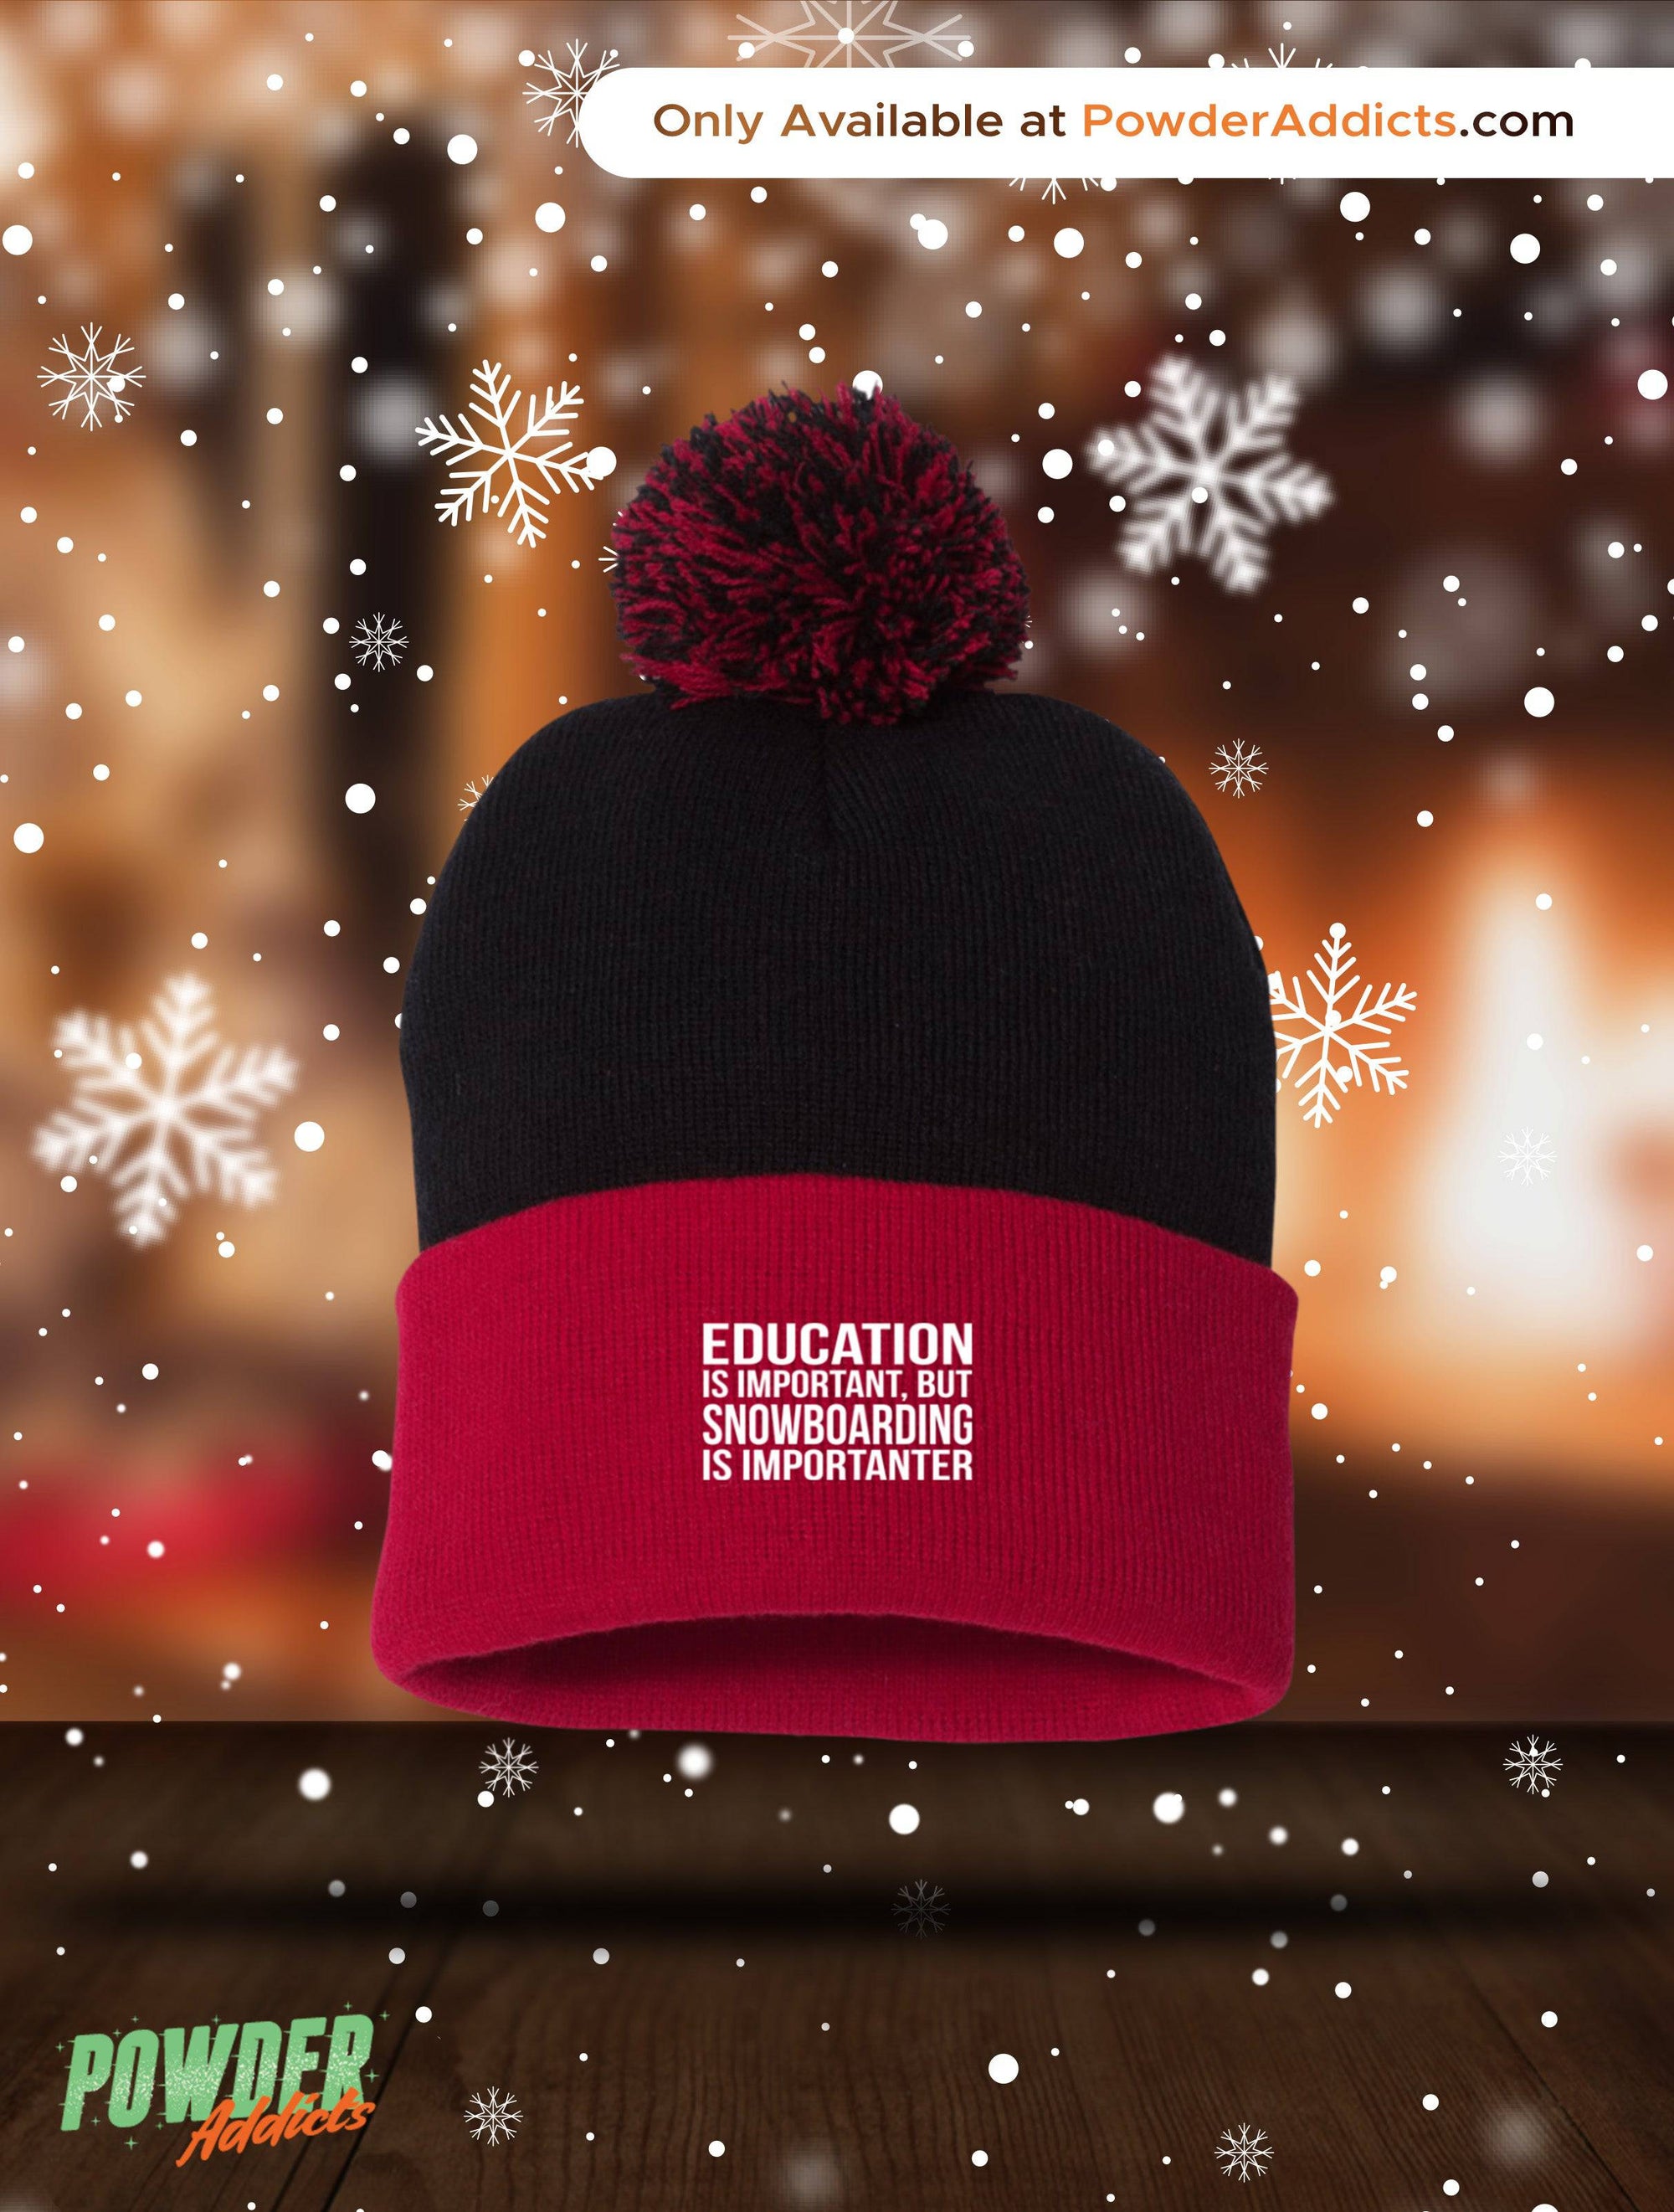 Education is Important but Snowboarding is Importanter Pom Pom Knit Cap - Powderaddicts